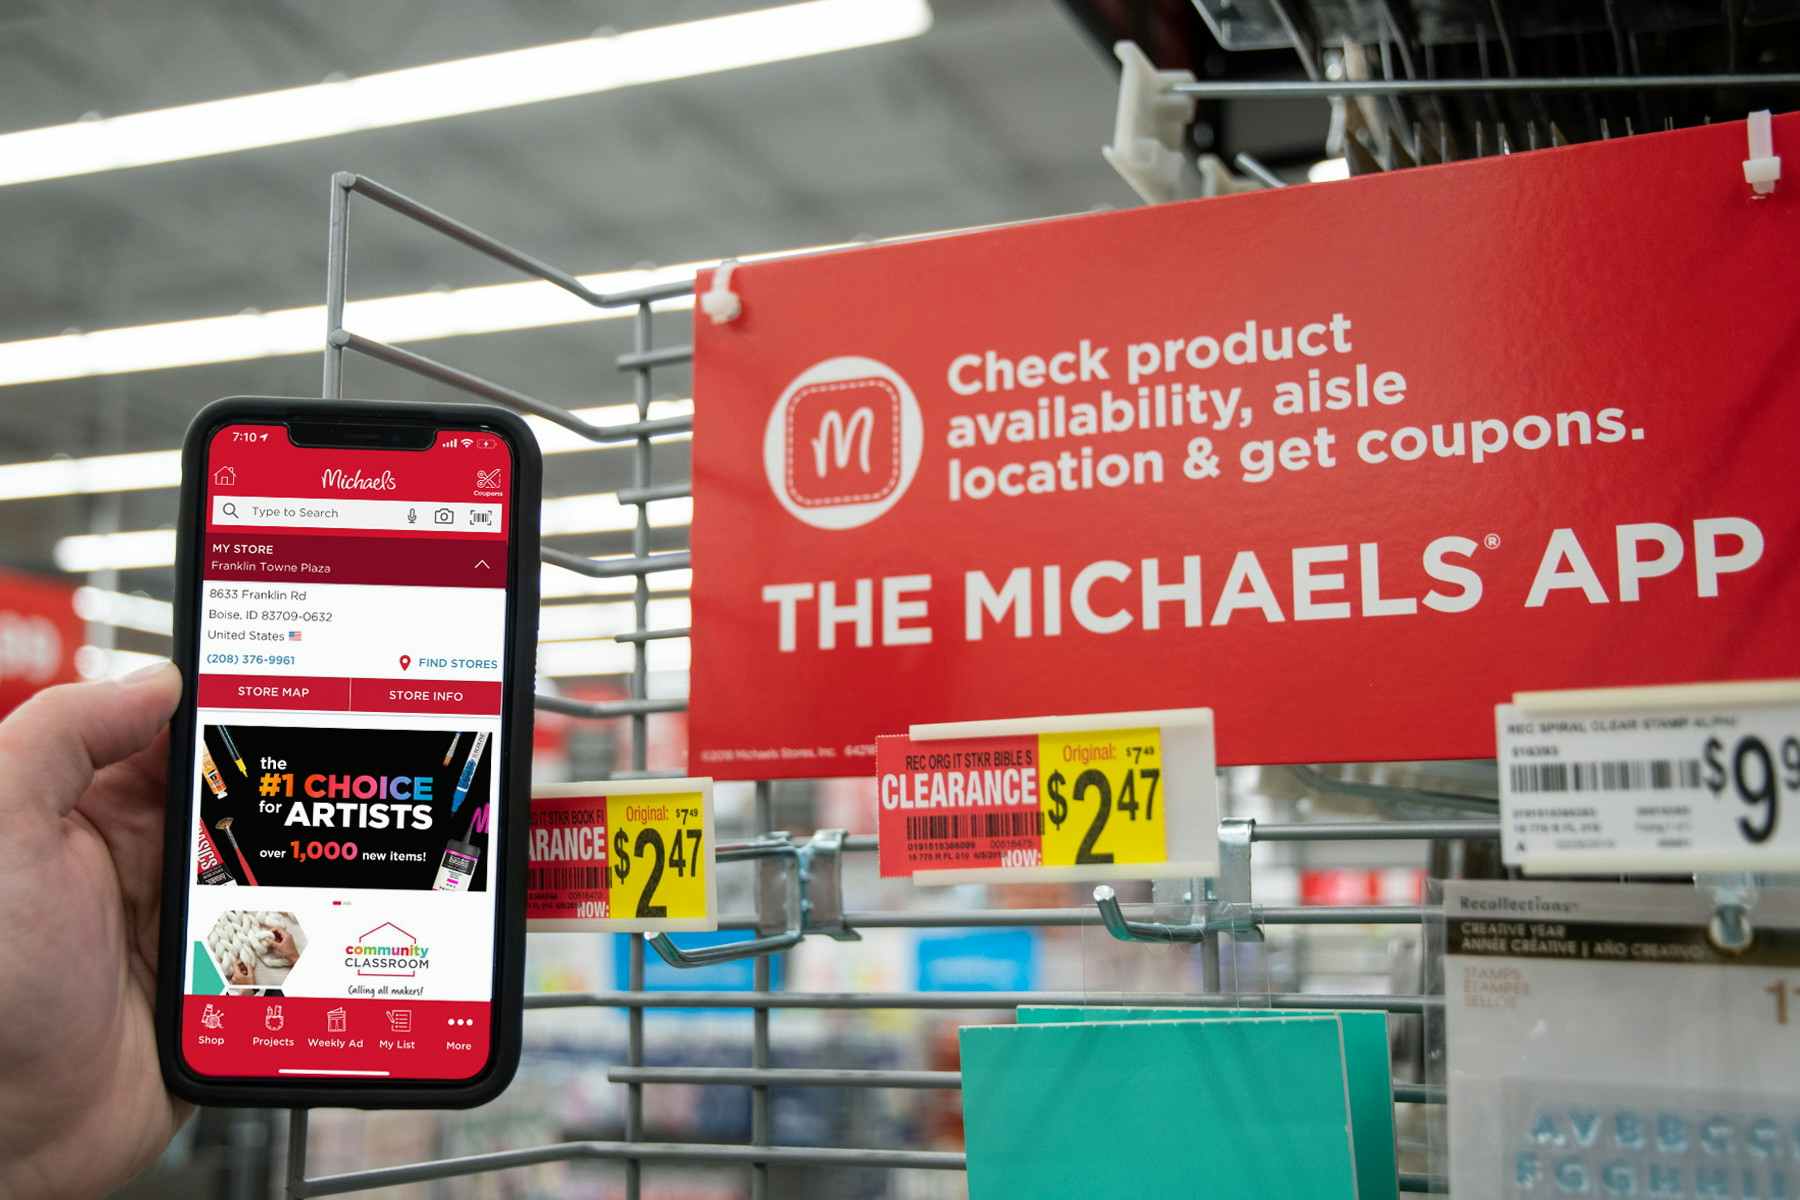 Download the Michaels app so you always have (at least) one Michaels coupon with you.